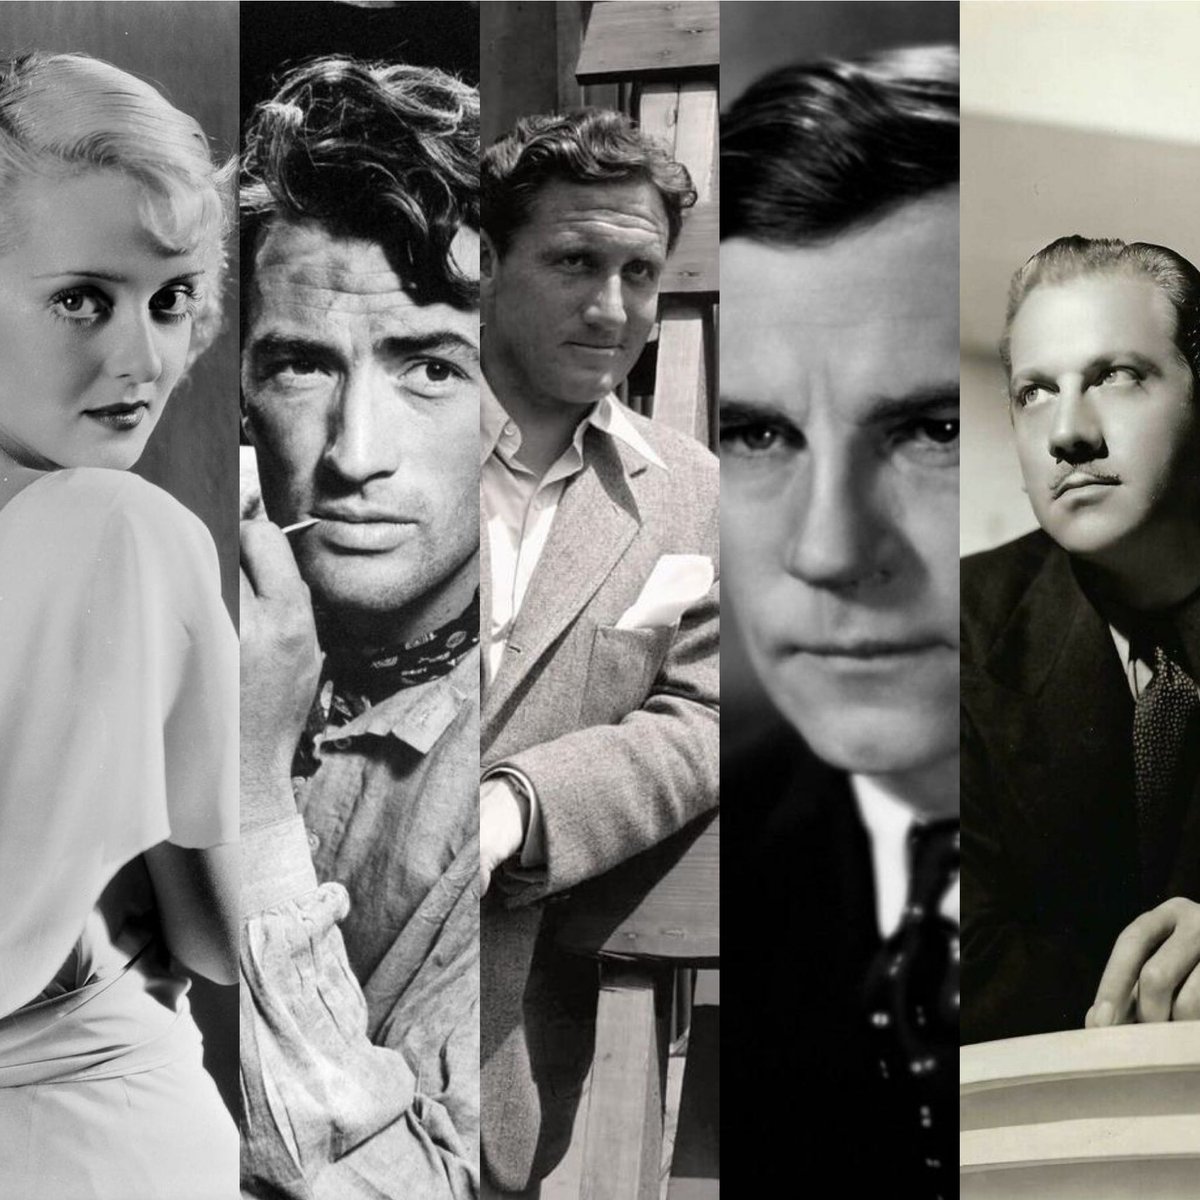 The ultimate quintet of Old Hollywood stars born on April 5th ✨ ♈️ Bette Davis, Gregory Peck (😍), Spencer Tracy, Walter Huston and Melvyn Douglas! #Cinema #actors #Aries